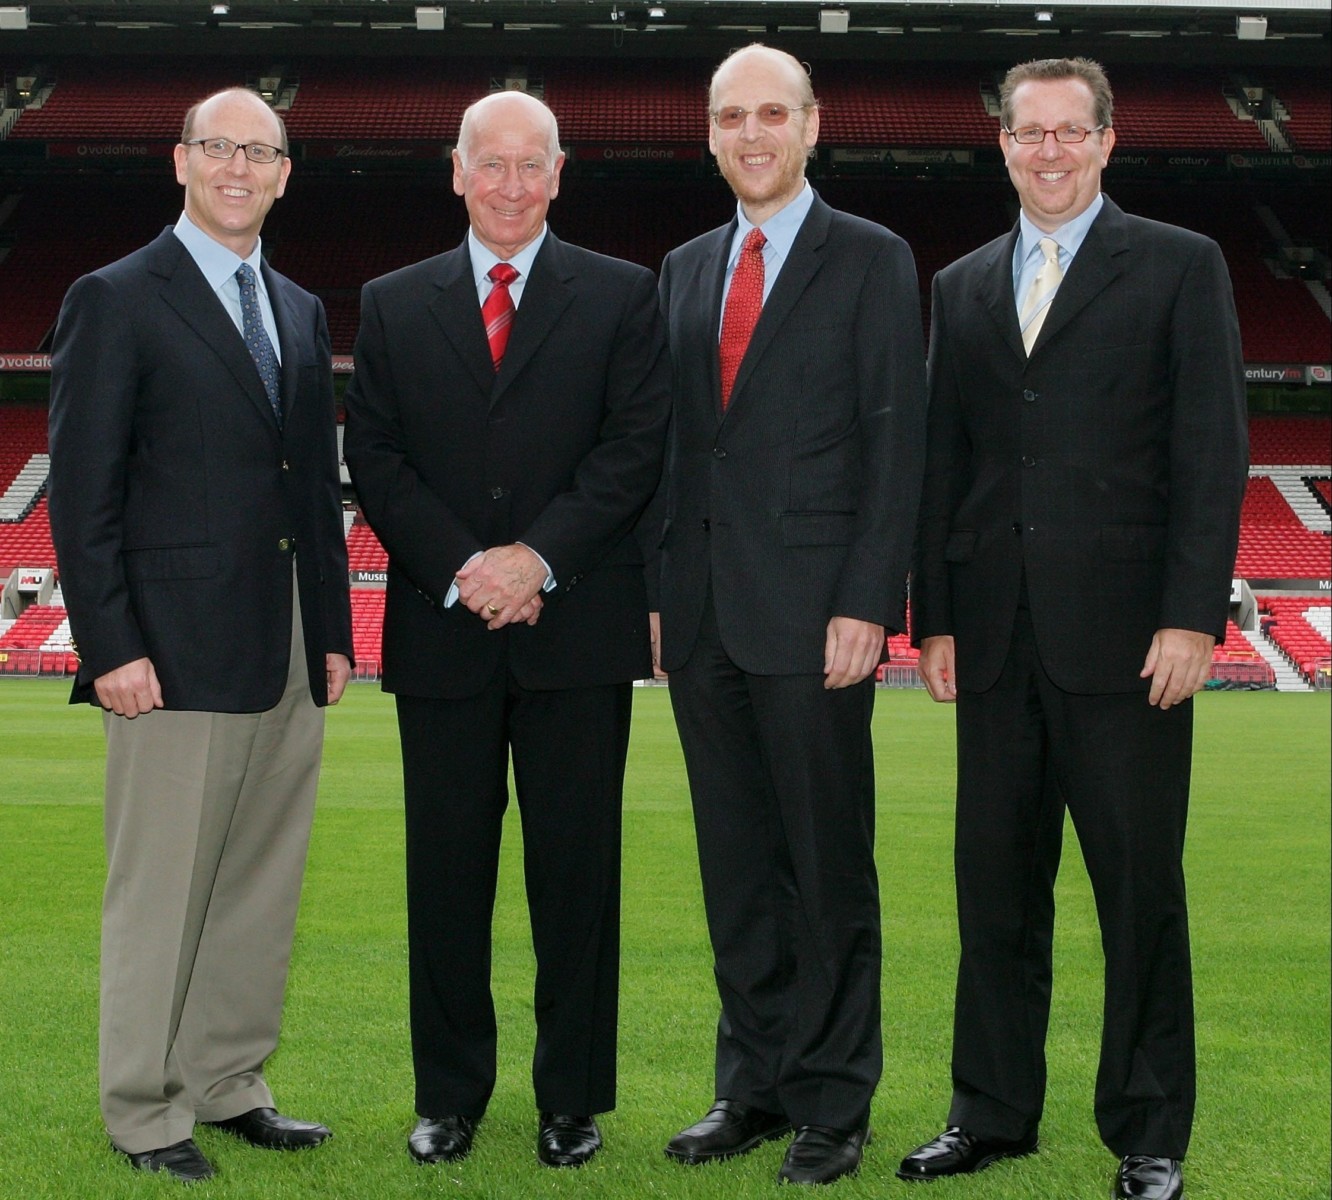 The Glazer family have a 90 per cent ownership of Man Utd